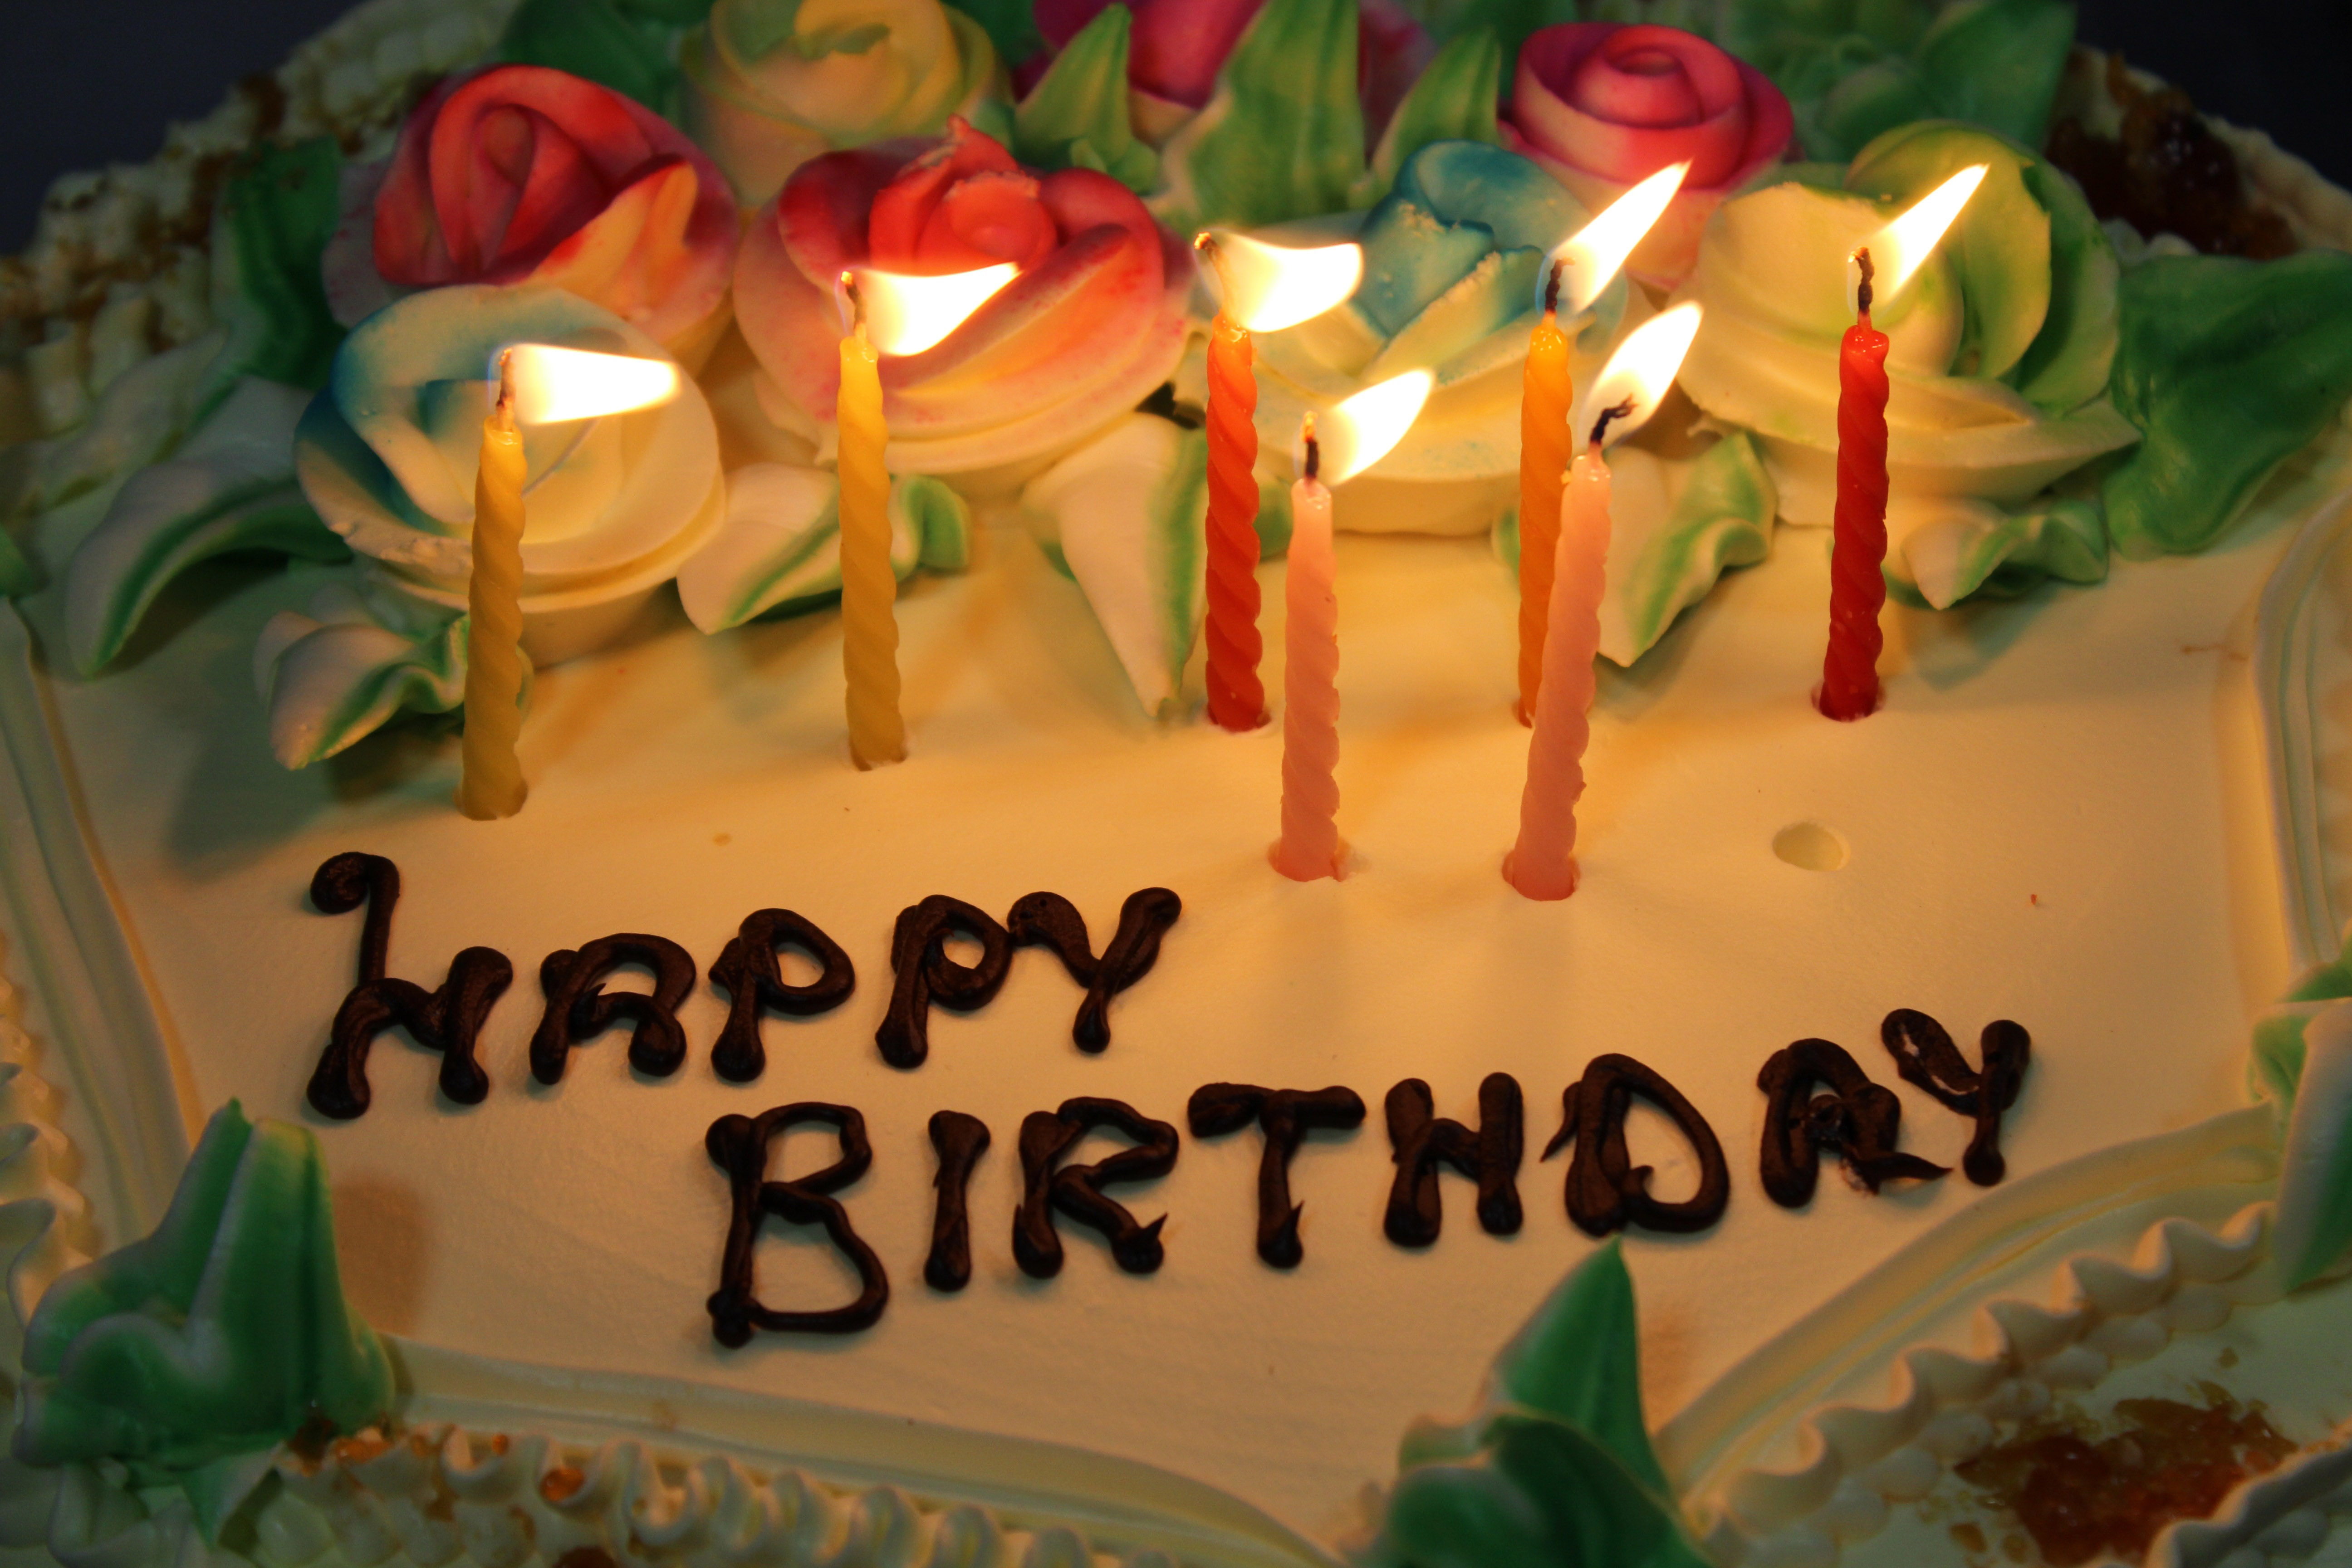 Happy Birthday Cake with Candles image - Happy BirthDay Cake With CanDles